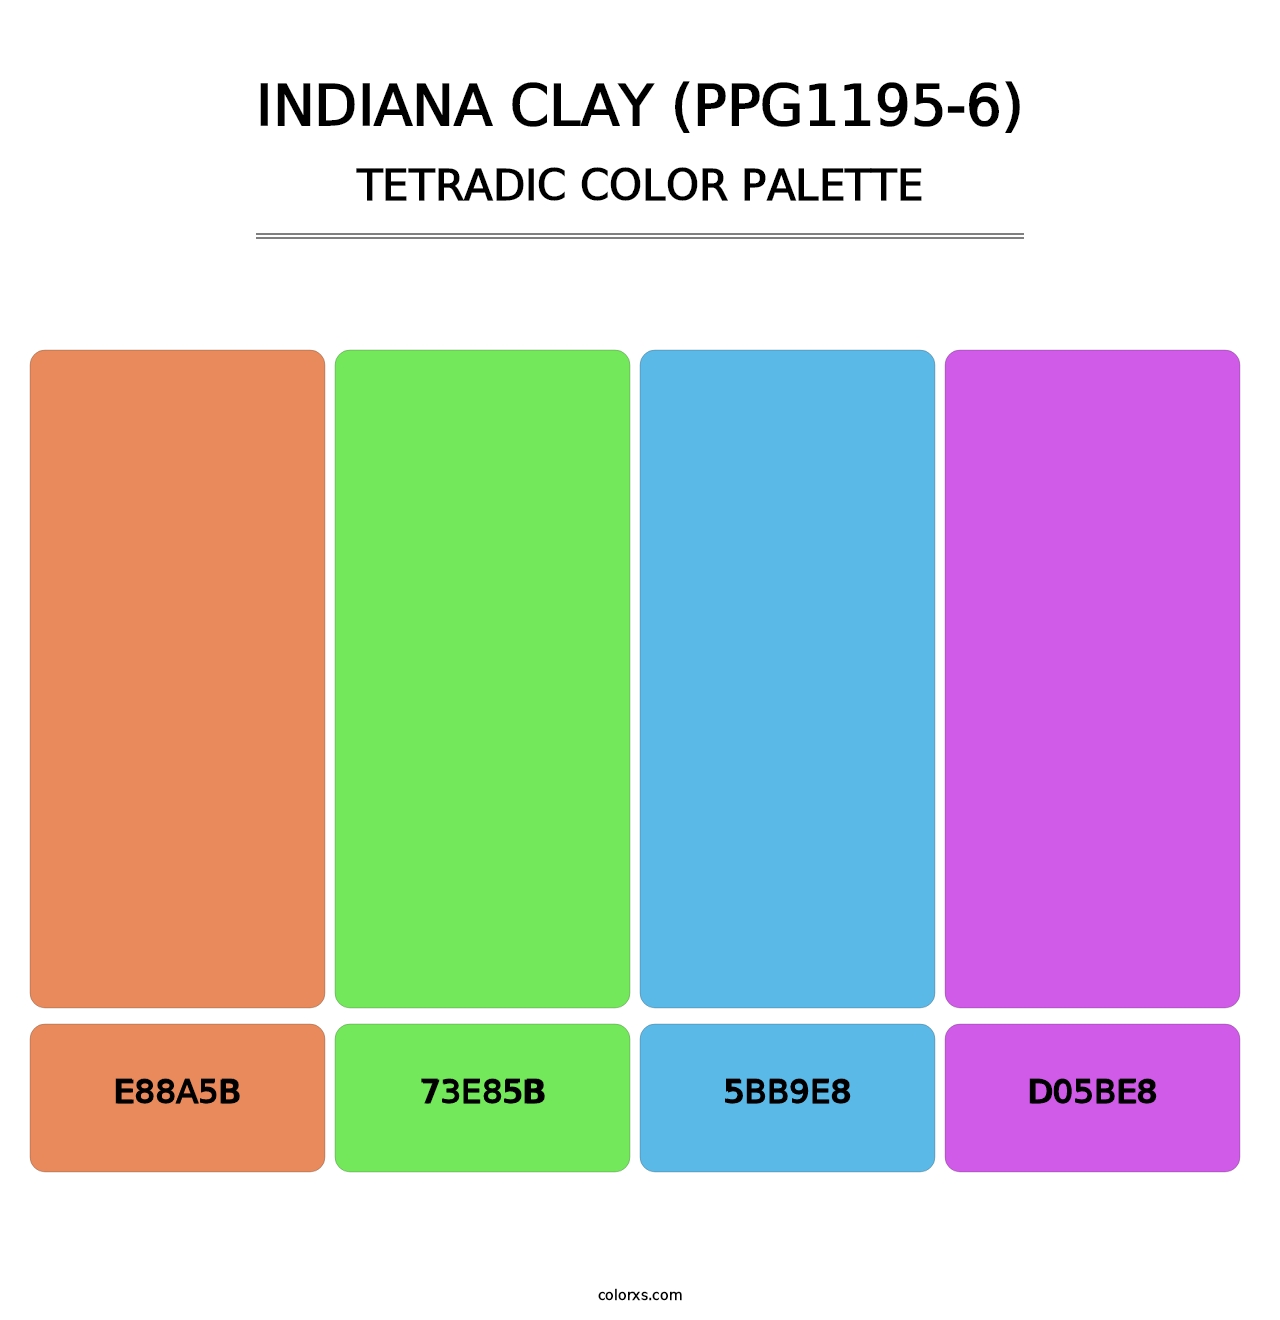 Indiana Clay (PPG1195-6) - Tetradic Color Palette